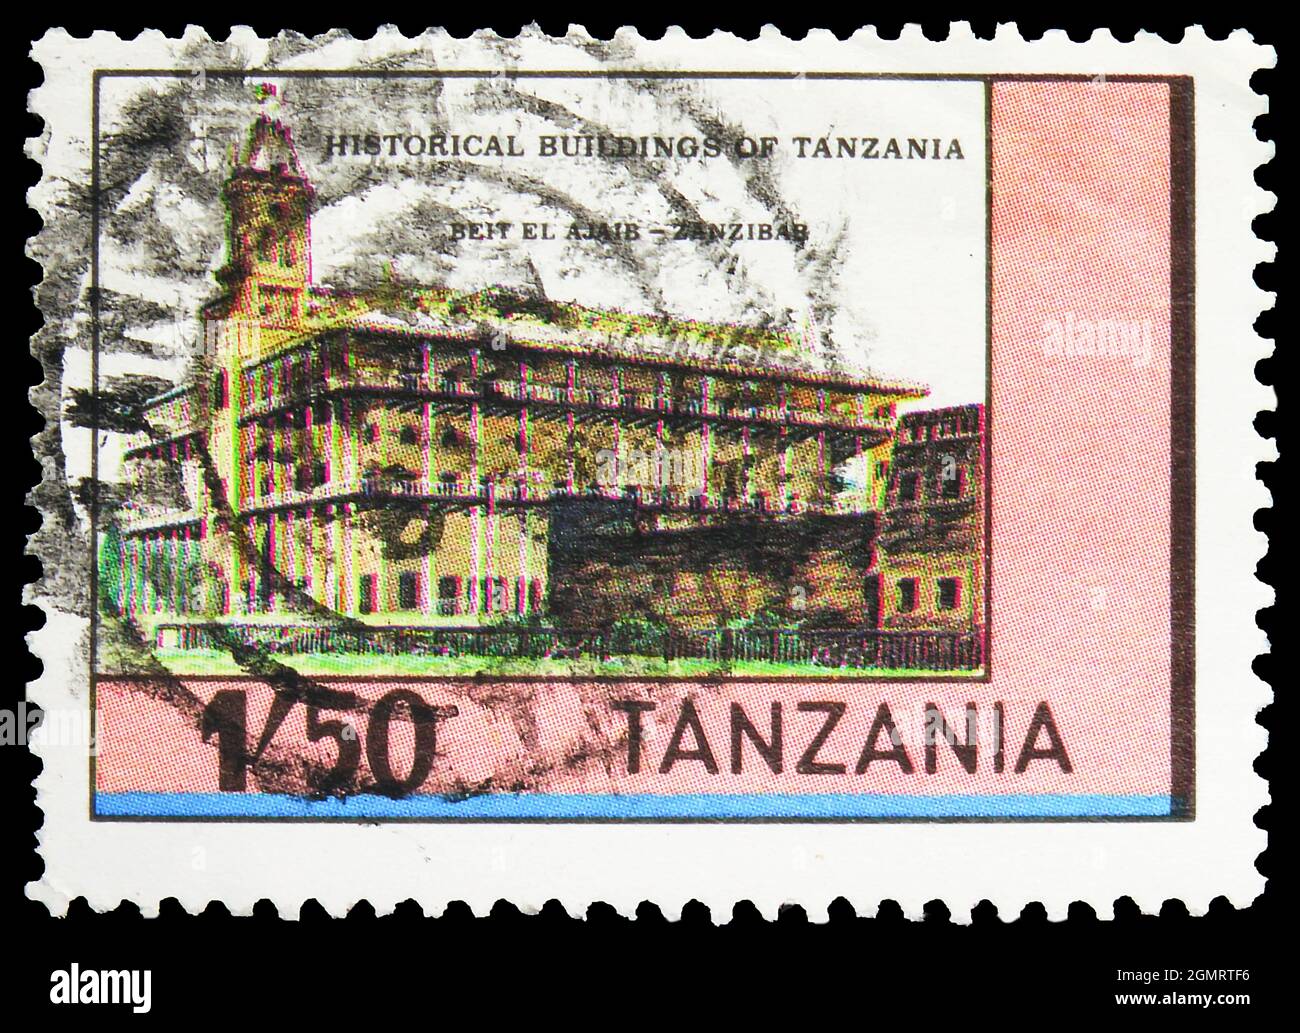 MOSCOW, RUSSIA - NOVEMBER 6, 2019: Postage stamp printed in Tanzania shows Beit-El-Ajaib, Historical buildings of Tanzania serie, 1.50 TSh - Tanzanian Stock Photo